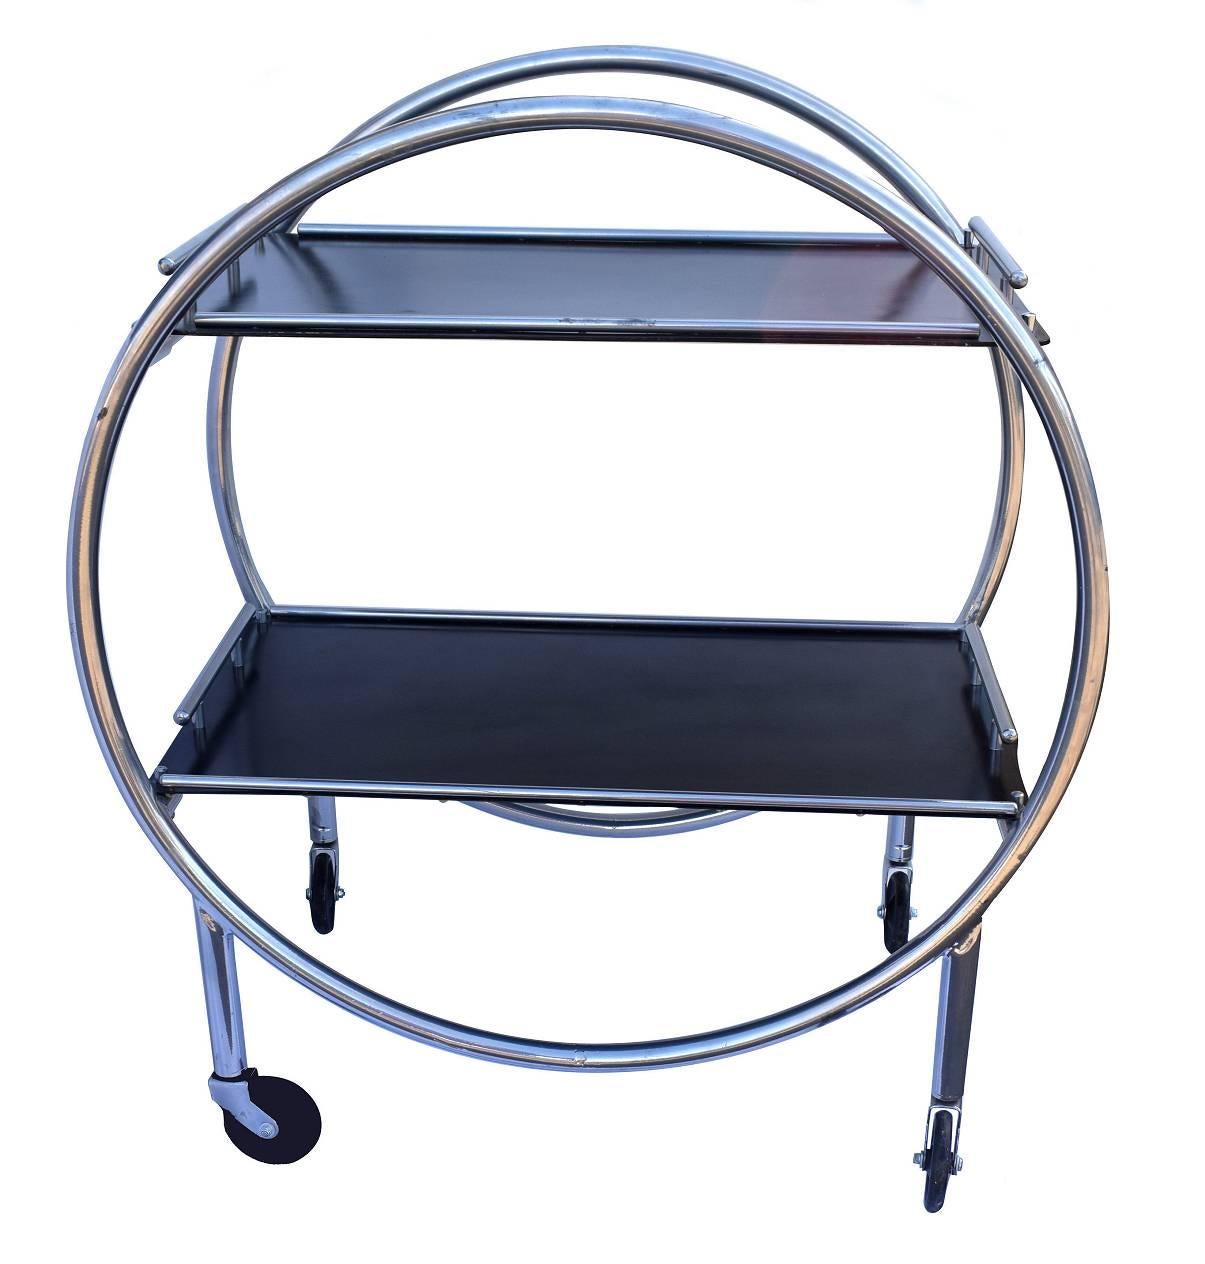 Stylish English 1930s Art Deco two-tier chrome and black laminate drinks hostess trolley bar cart. If glam is your thing then this is for you! In situ these carts look nothing less than amazing. Can be used for serving drinks or just displaying your